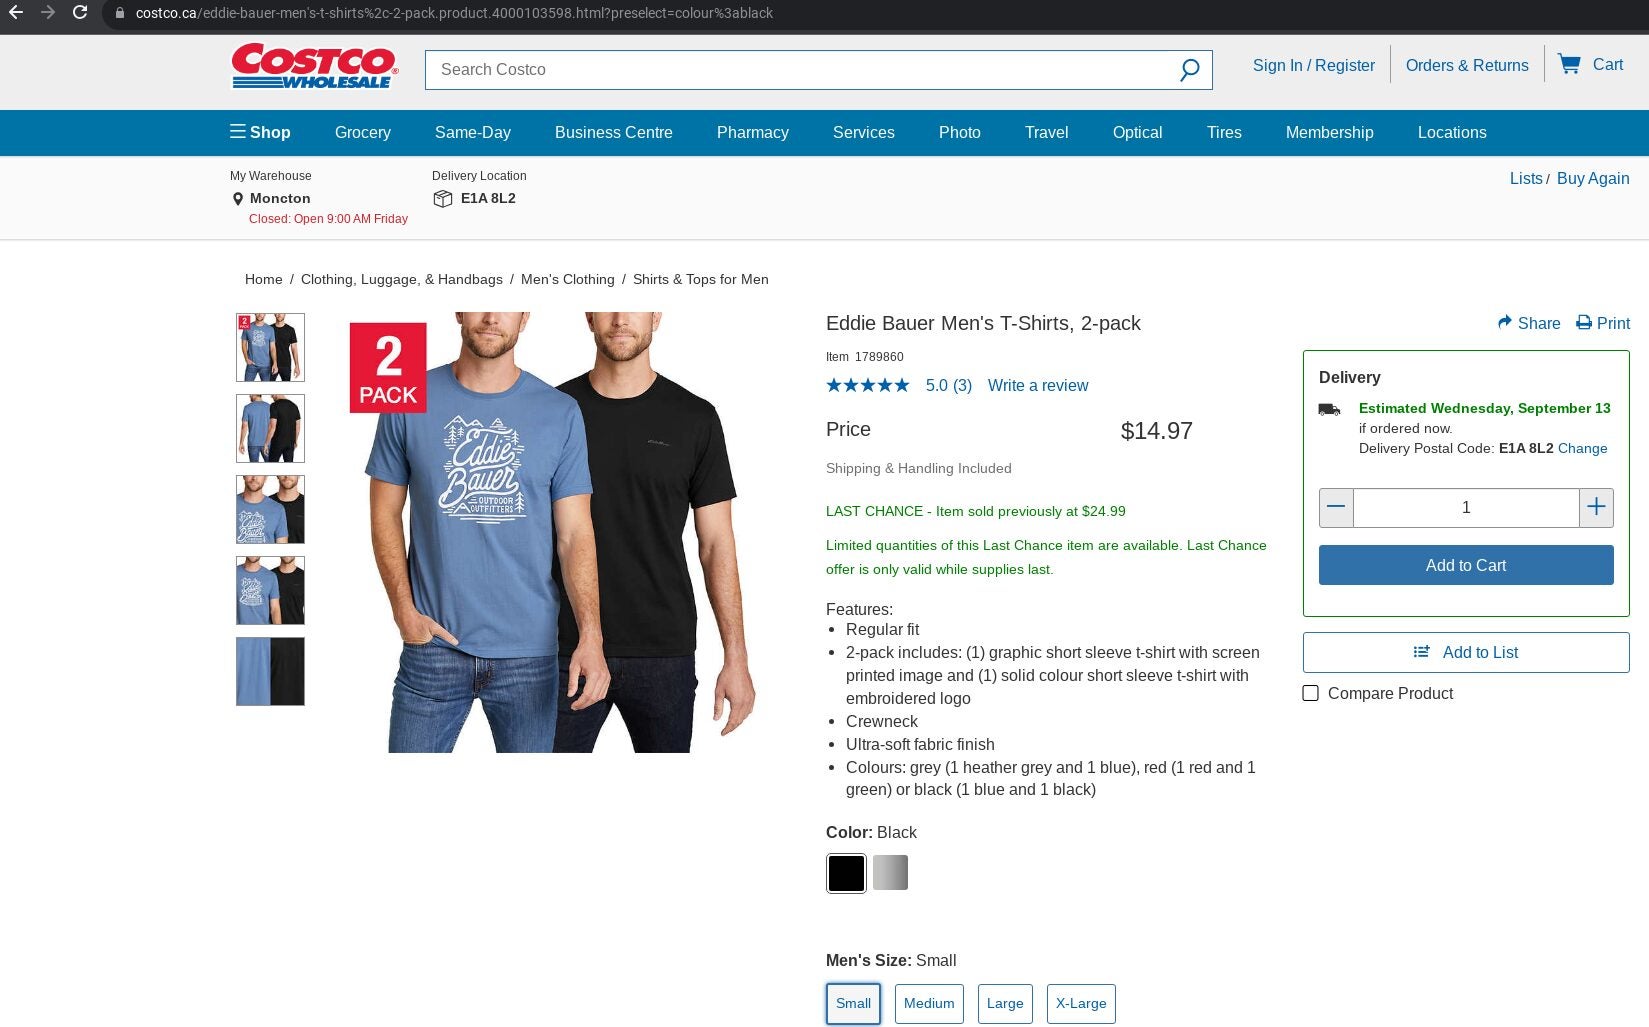 Costco] <<OOS Now>>Clearance - Eddie Bauer Men's T-Shirts, 2-pack - 14.97 -  RedFlagDeals.com Forums